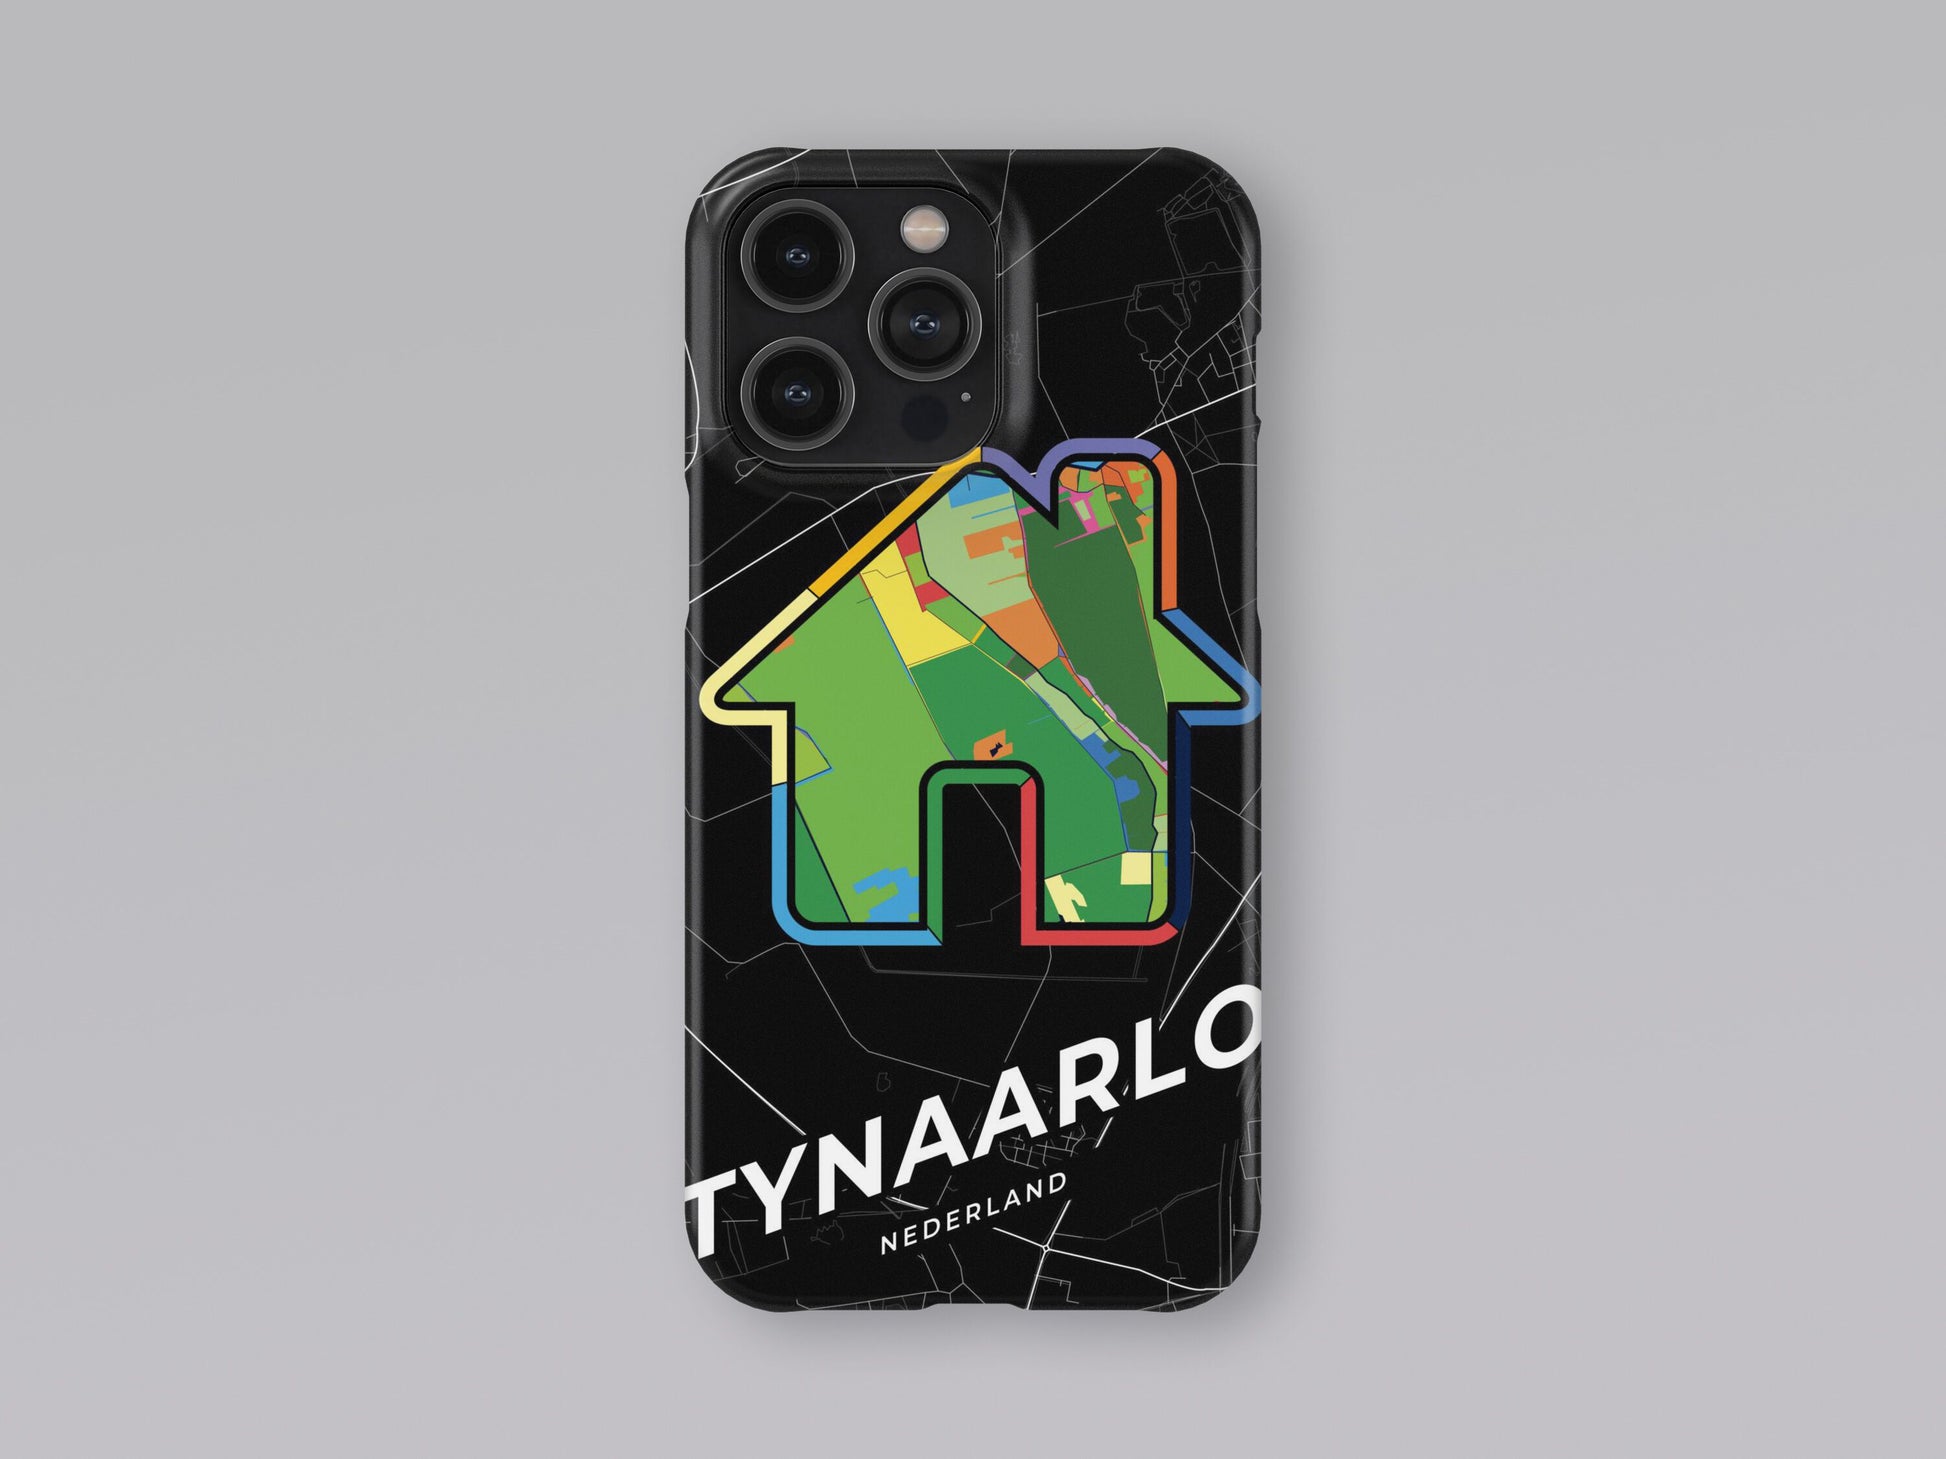 Tynaarlo Netherlands slim phone case with colorful icon 3